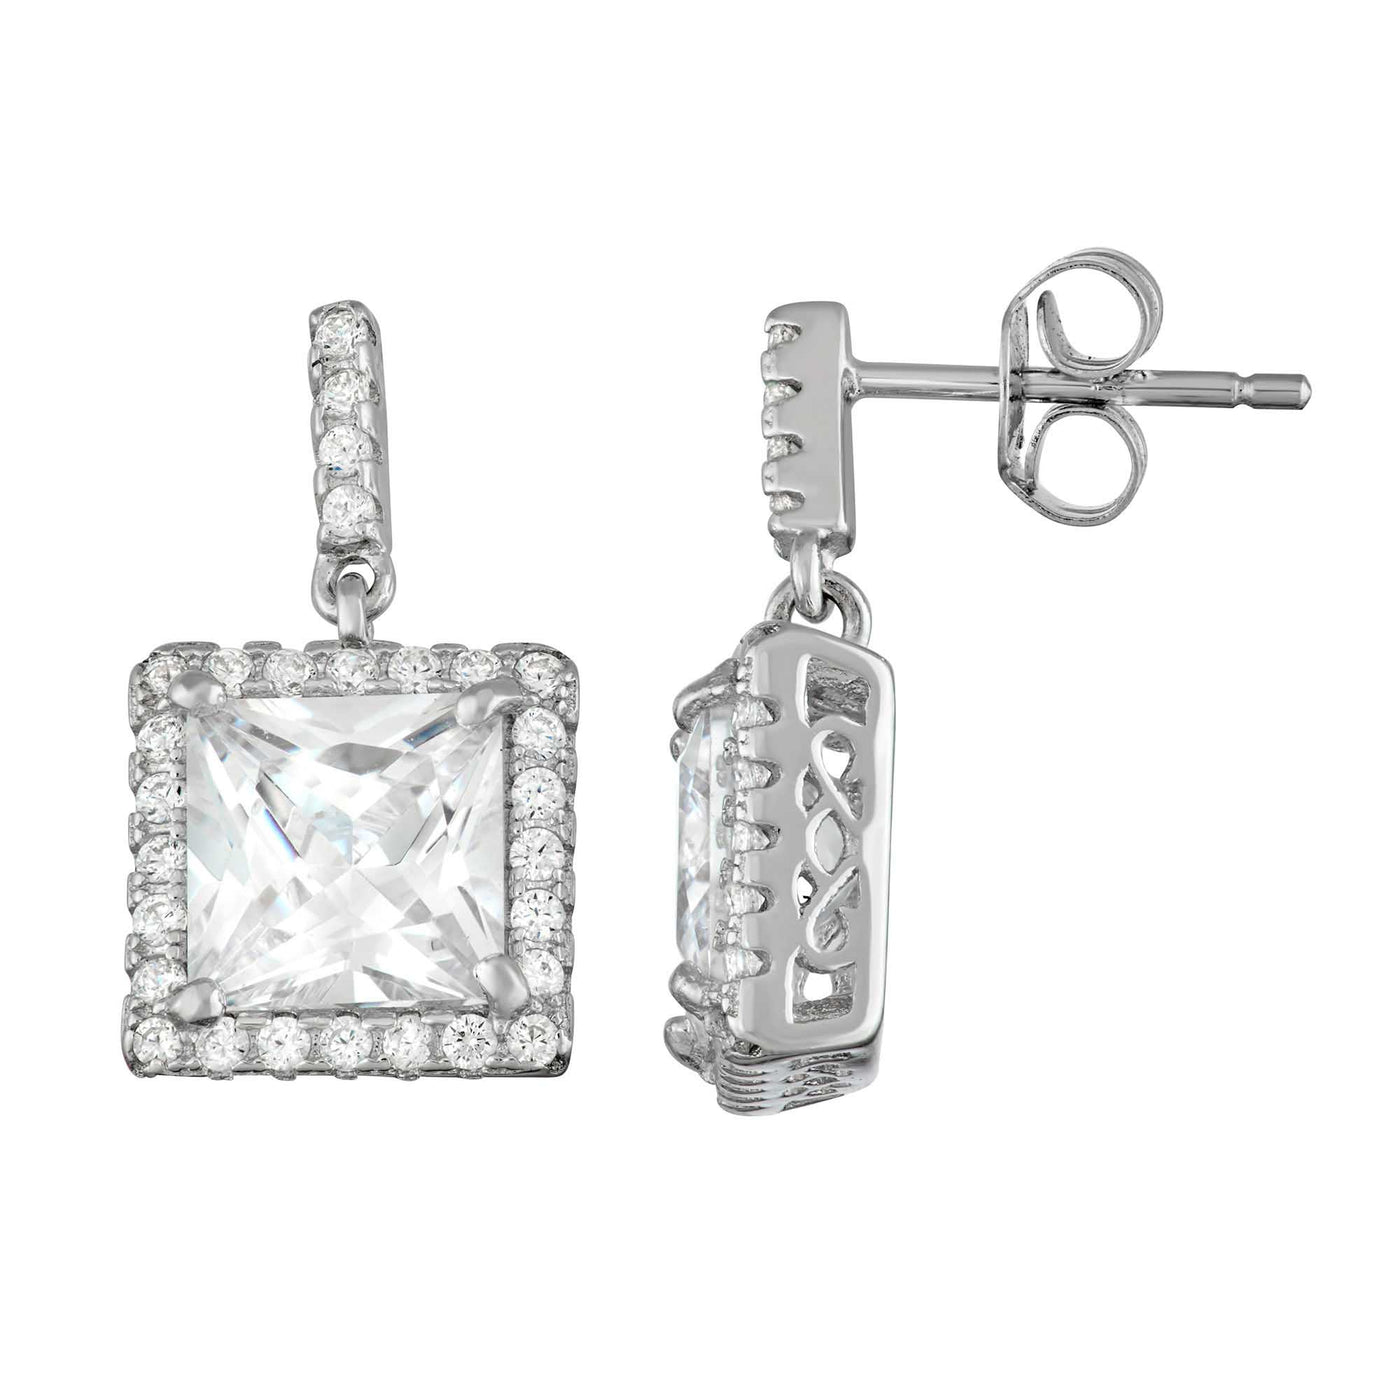 Rebecca Sloane Silver Square Earrings With Faceted White CZ